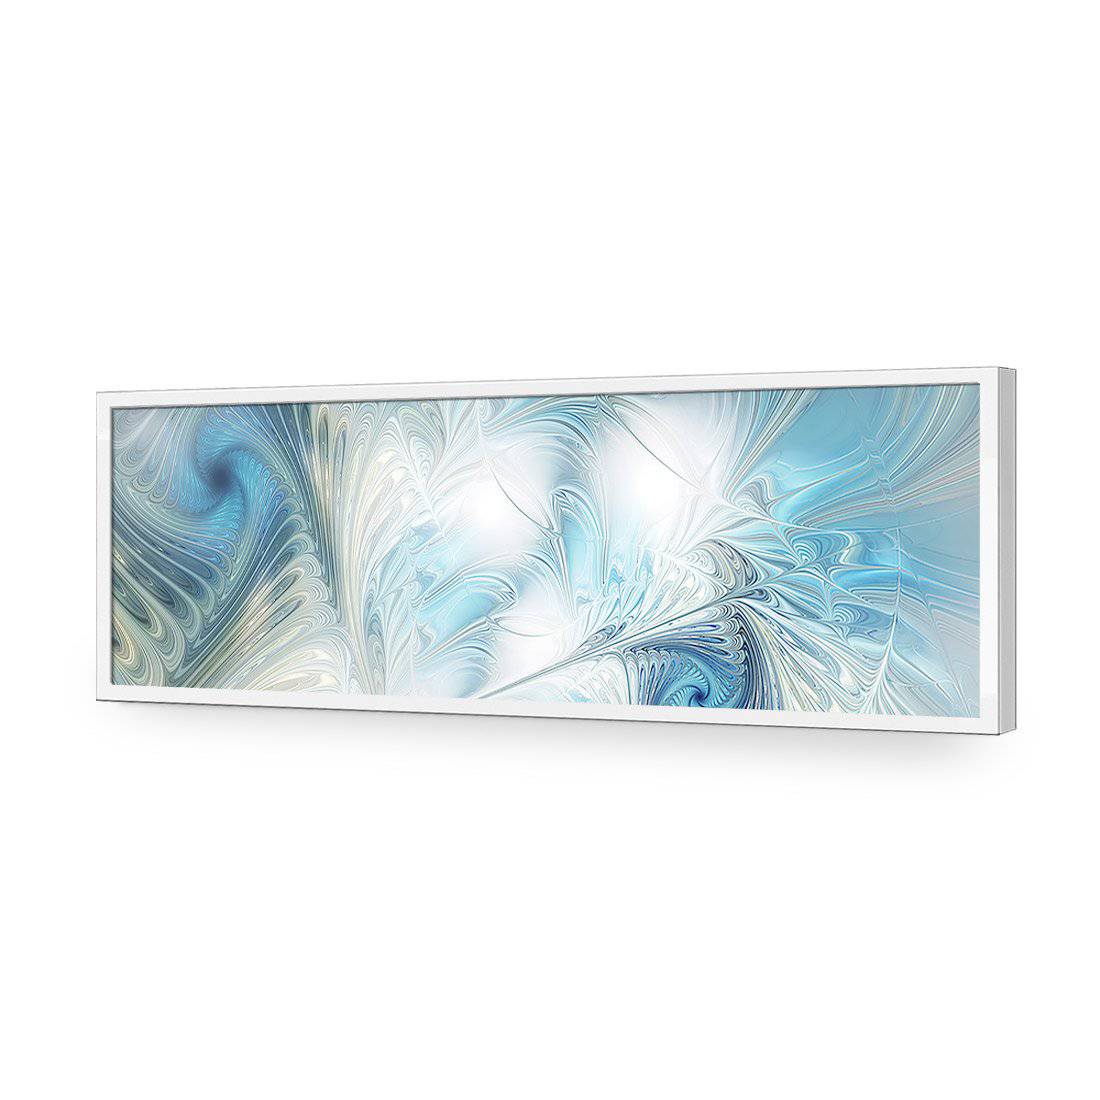 Travesty, Long-Acrylic-Wall Art Design-Without Border-Acrylic - White Frame-60x20cm-Wall Art Designs